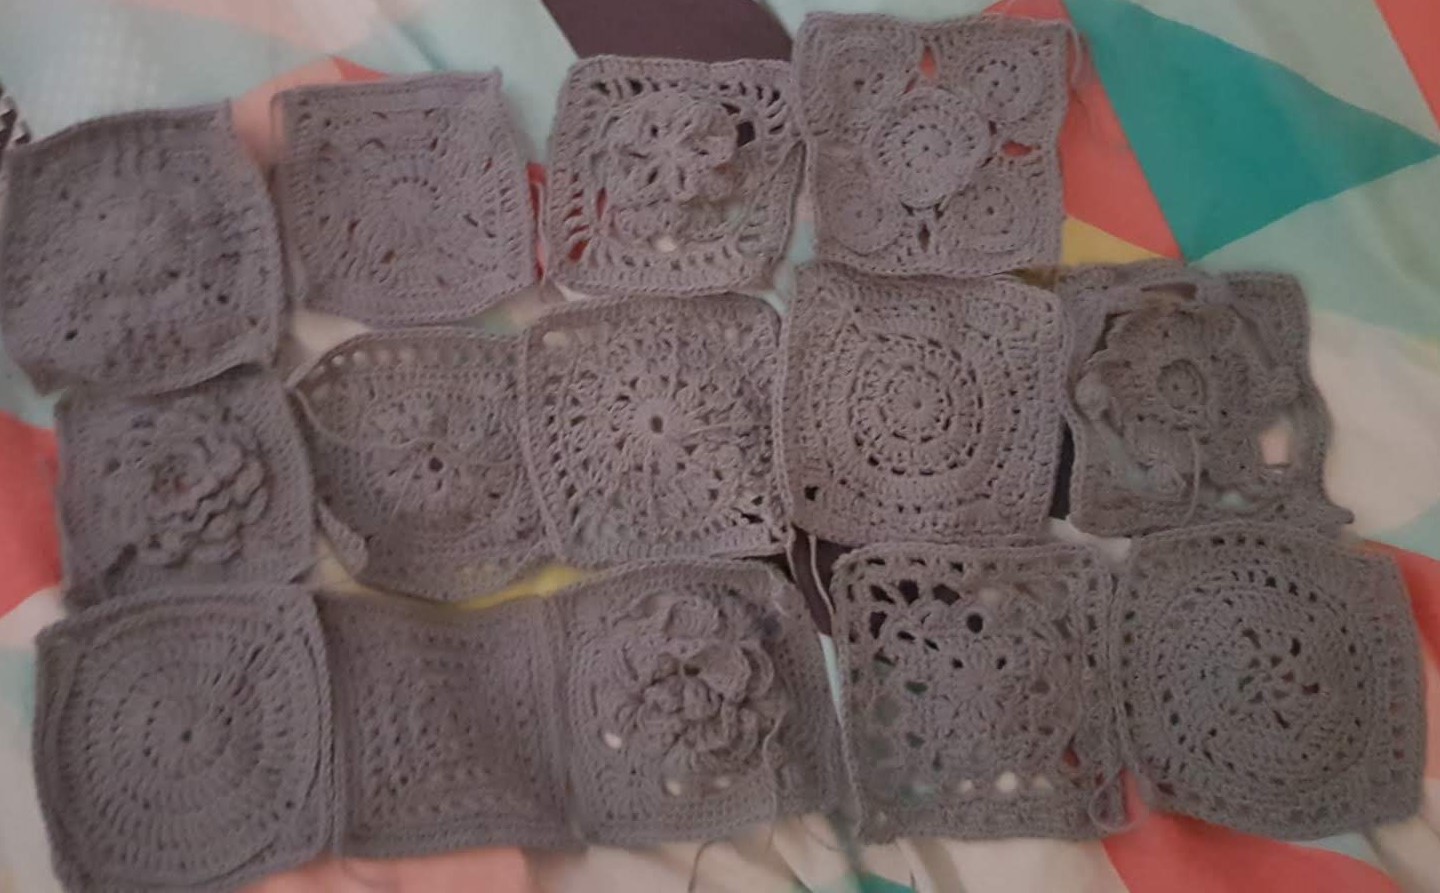 A collection of 14 crocheted granny squares laid flat, crocheted in a gray cotton yarn. Each square is a different pattern with some flat and some 3-d. There are some complex patterns, some simple patterns, and about a third of the patterns are flowers.